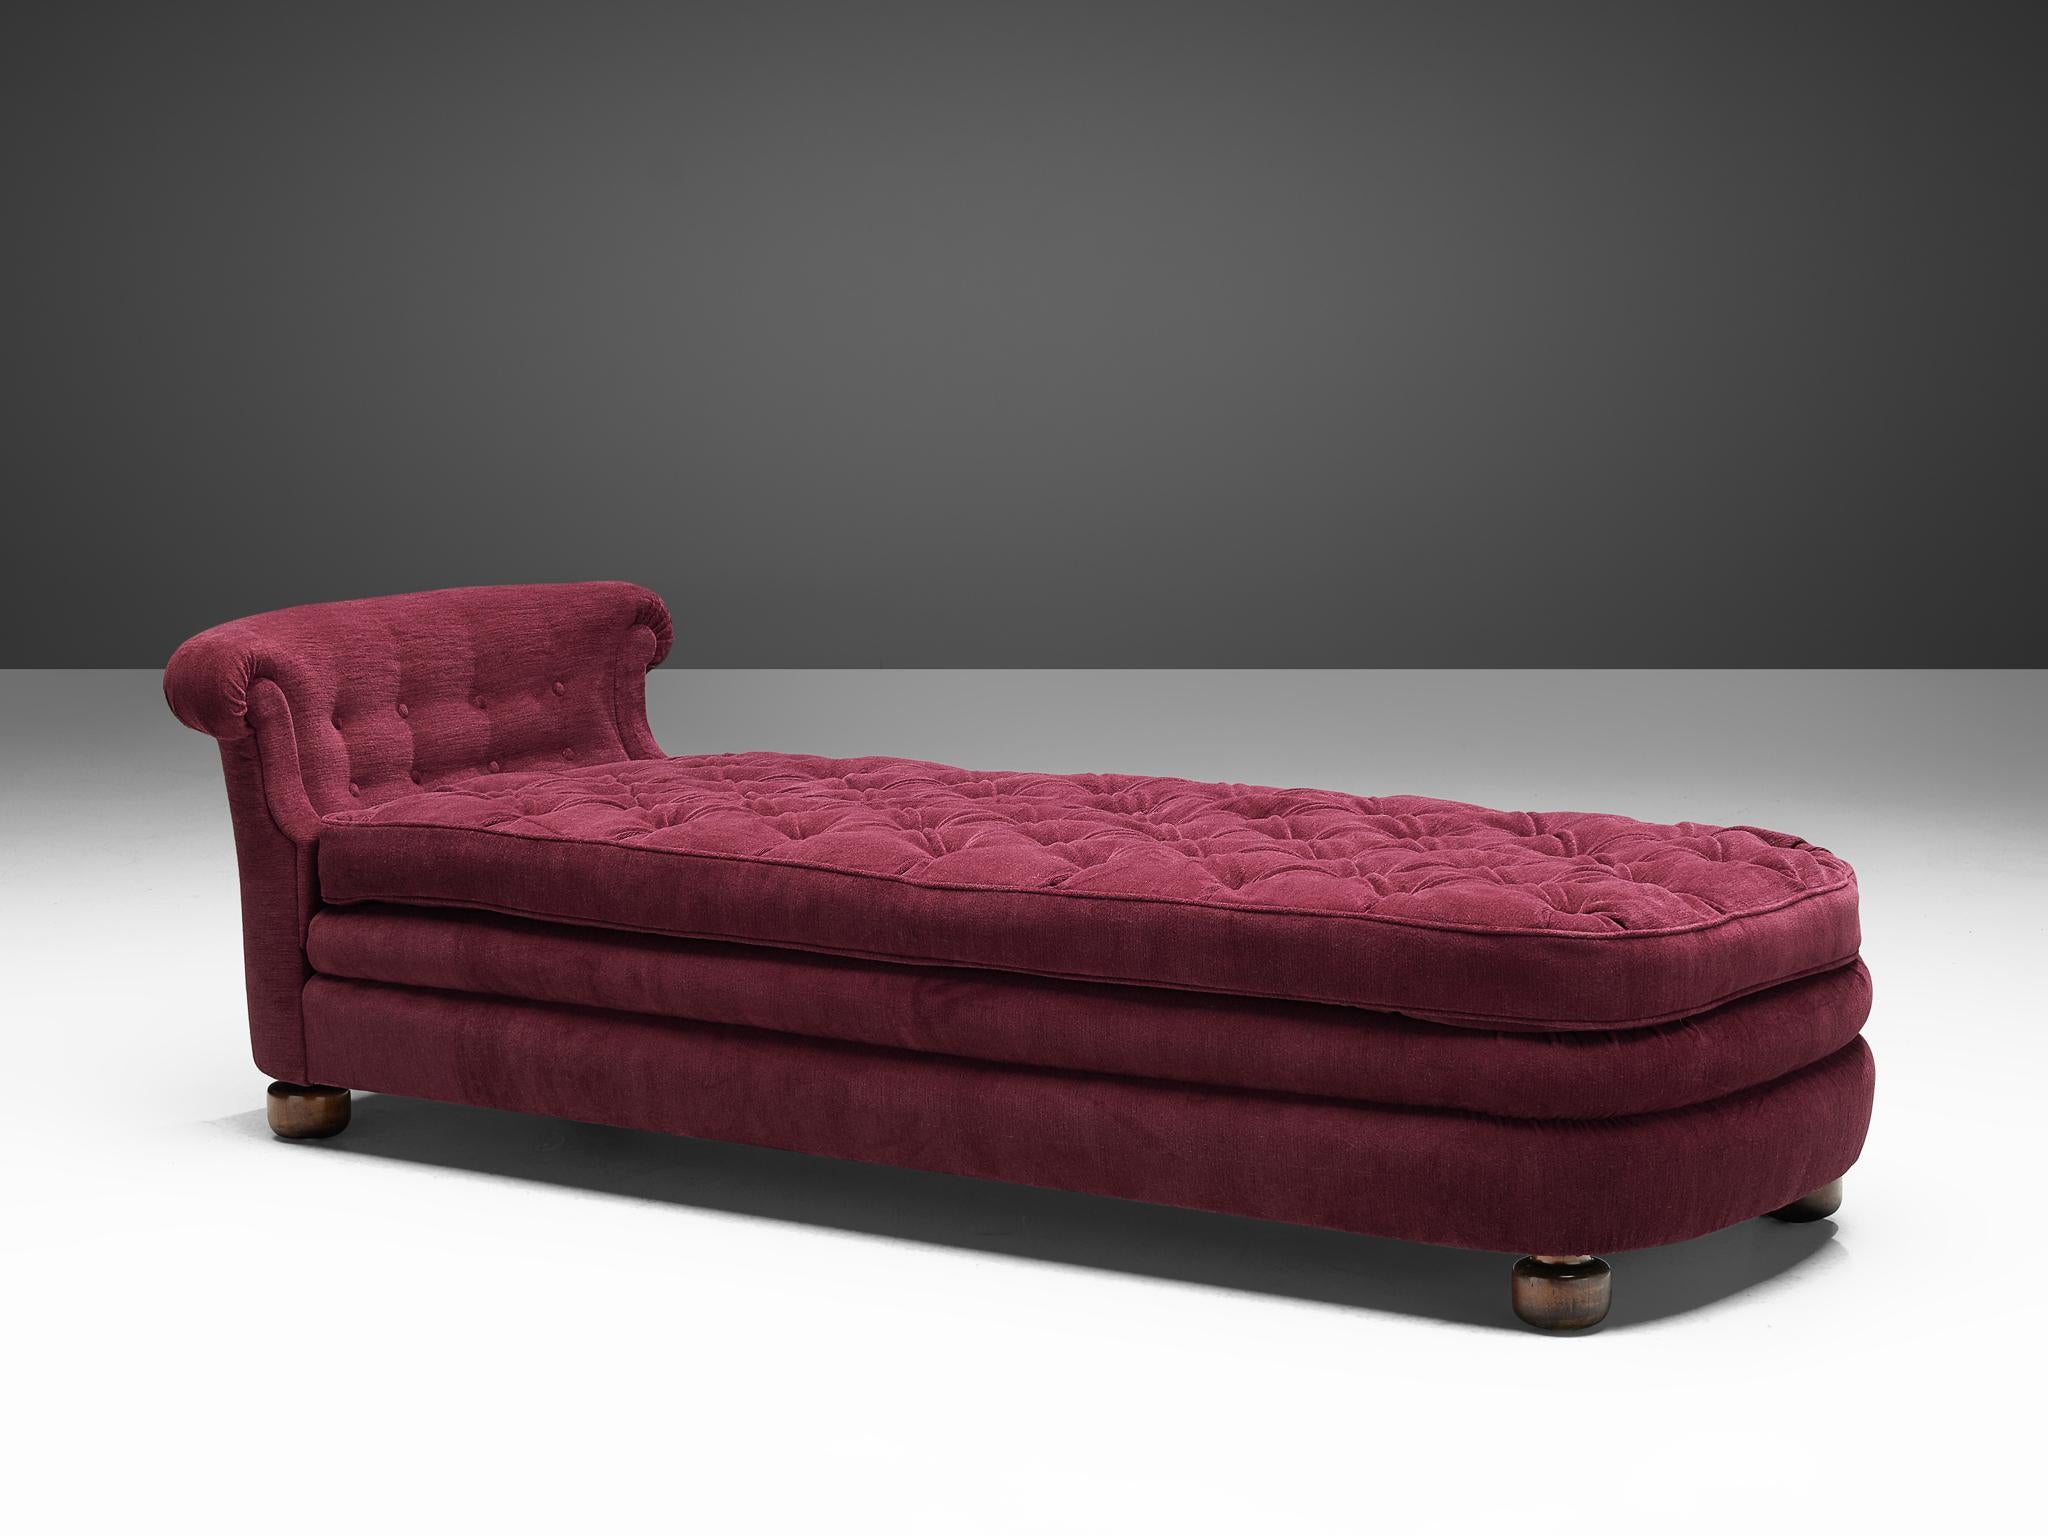 Josef Frank, daybed '775', fabric and wood, Sweden, 1938.

Completely restored and reupholstered chaise lounge designed by Josef Frank in 1938. The piece has been reupholstered in a burgundy-purple, high quality fabric. The tufted seat and backrest